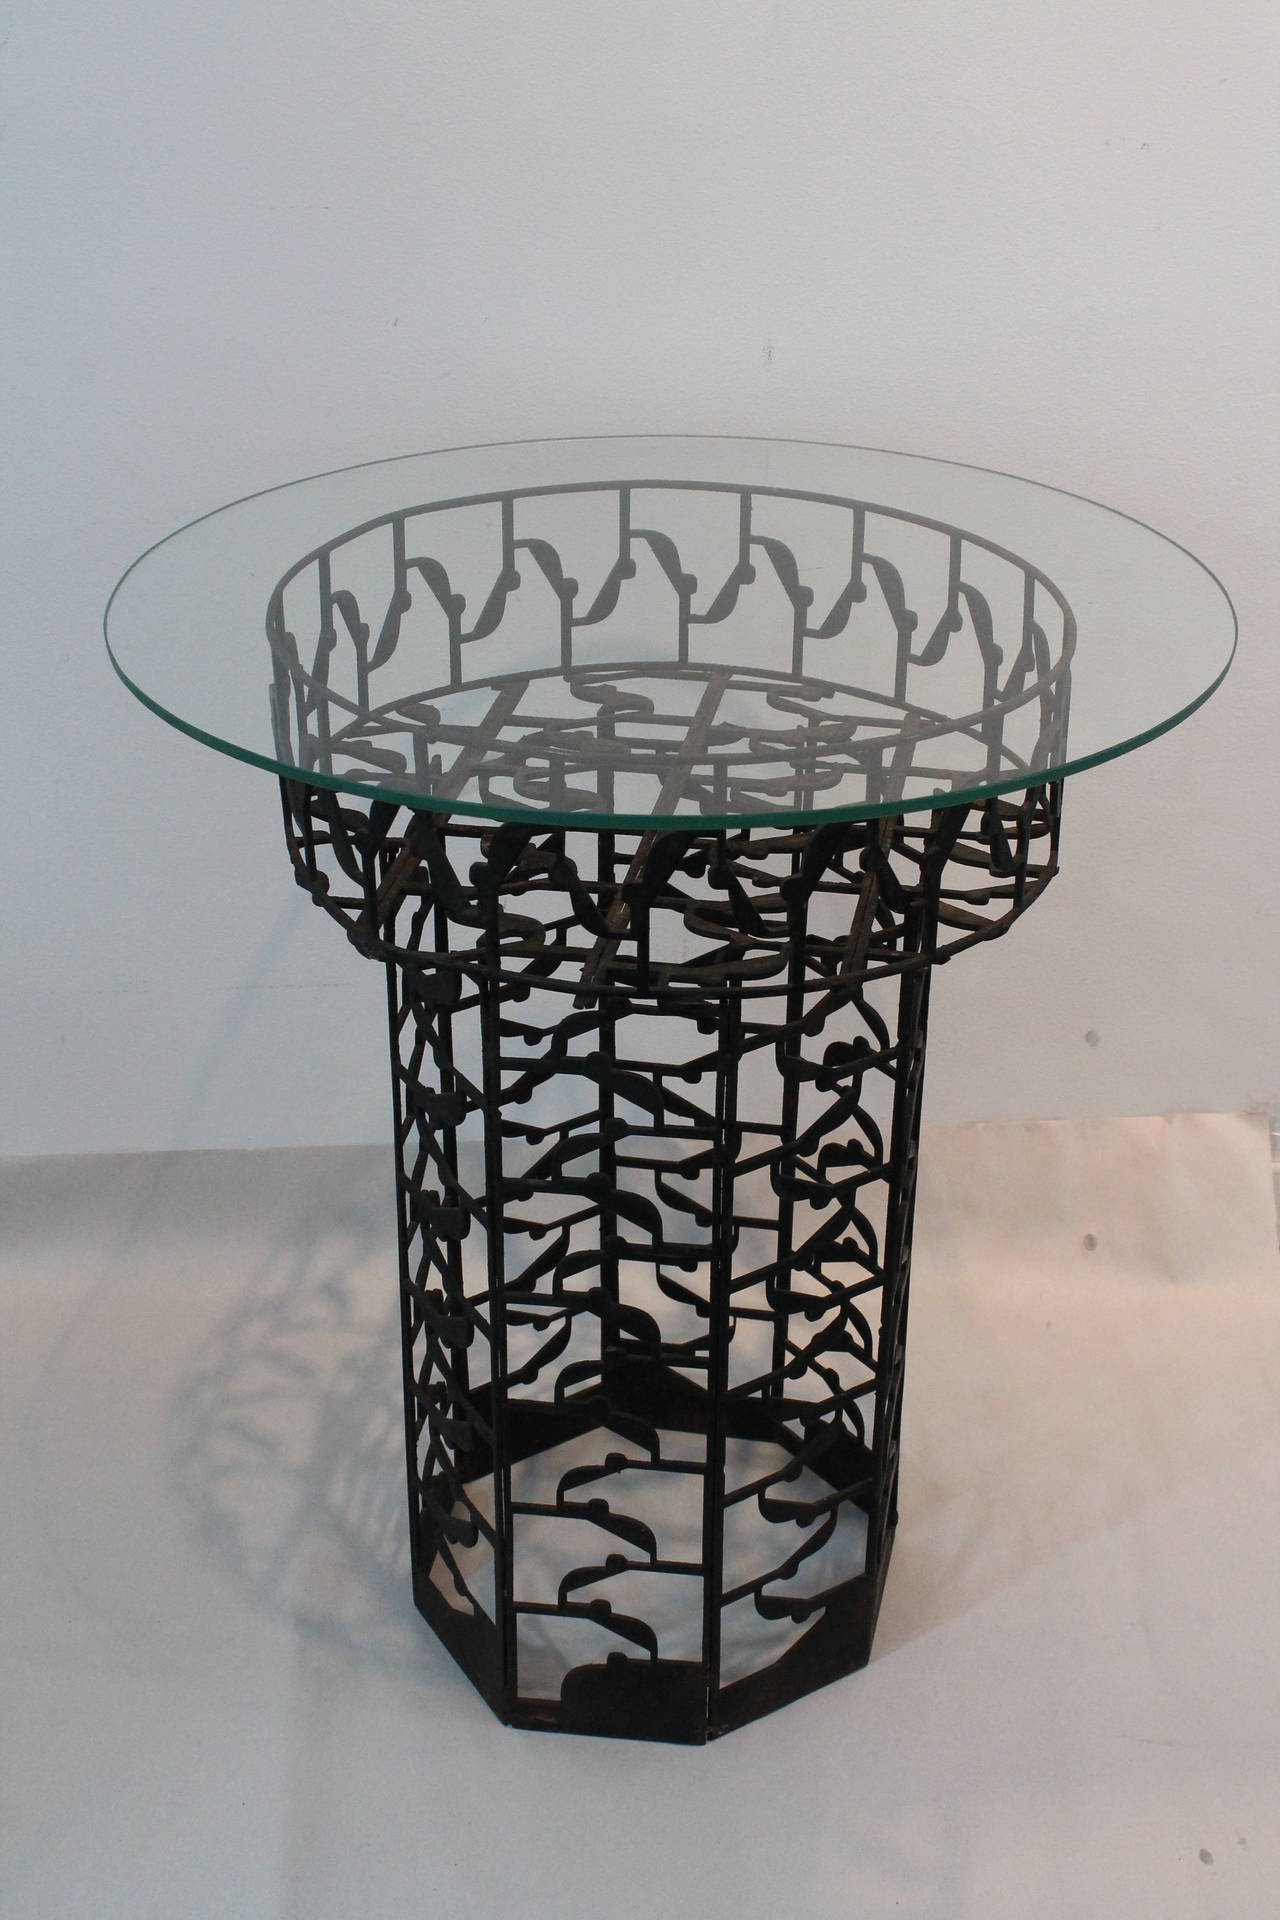 Curious stamped iron side table or plant stand that is constructed from salvaged machinist plate steel cast offs. The individual strips were ingeniously welded together to create this form.
The glass top can be removed and the table becomes a plant